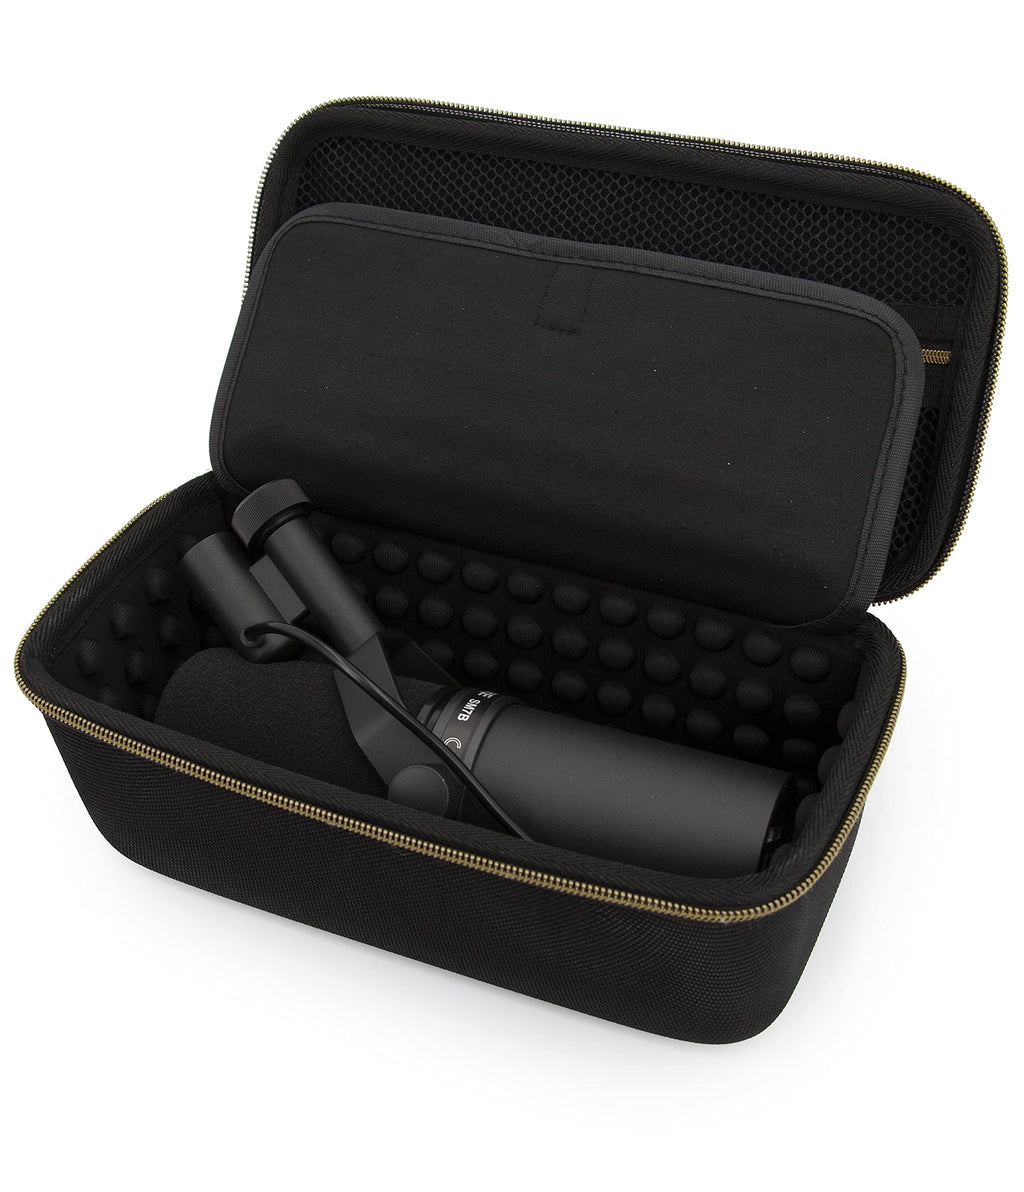  [AUSTRALIA] - CASEMATIX Studio Case Compatible with Rode PodMic, Shure SM7B Microphone and Other Large Podcast Mics with XLR Recording Accessories - Includes Podcasting Mic Bag Only